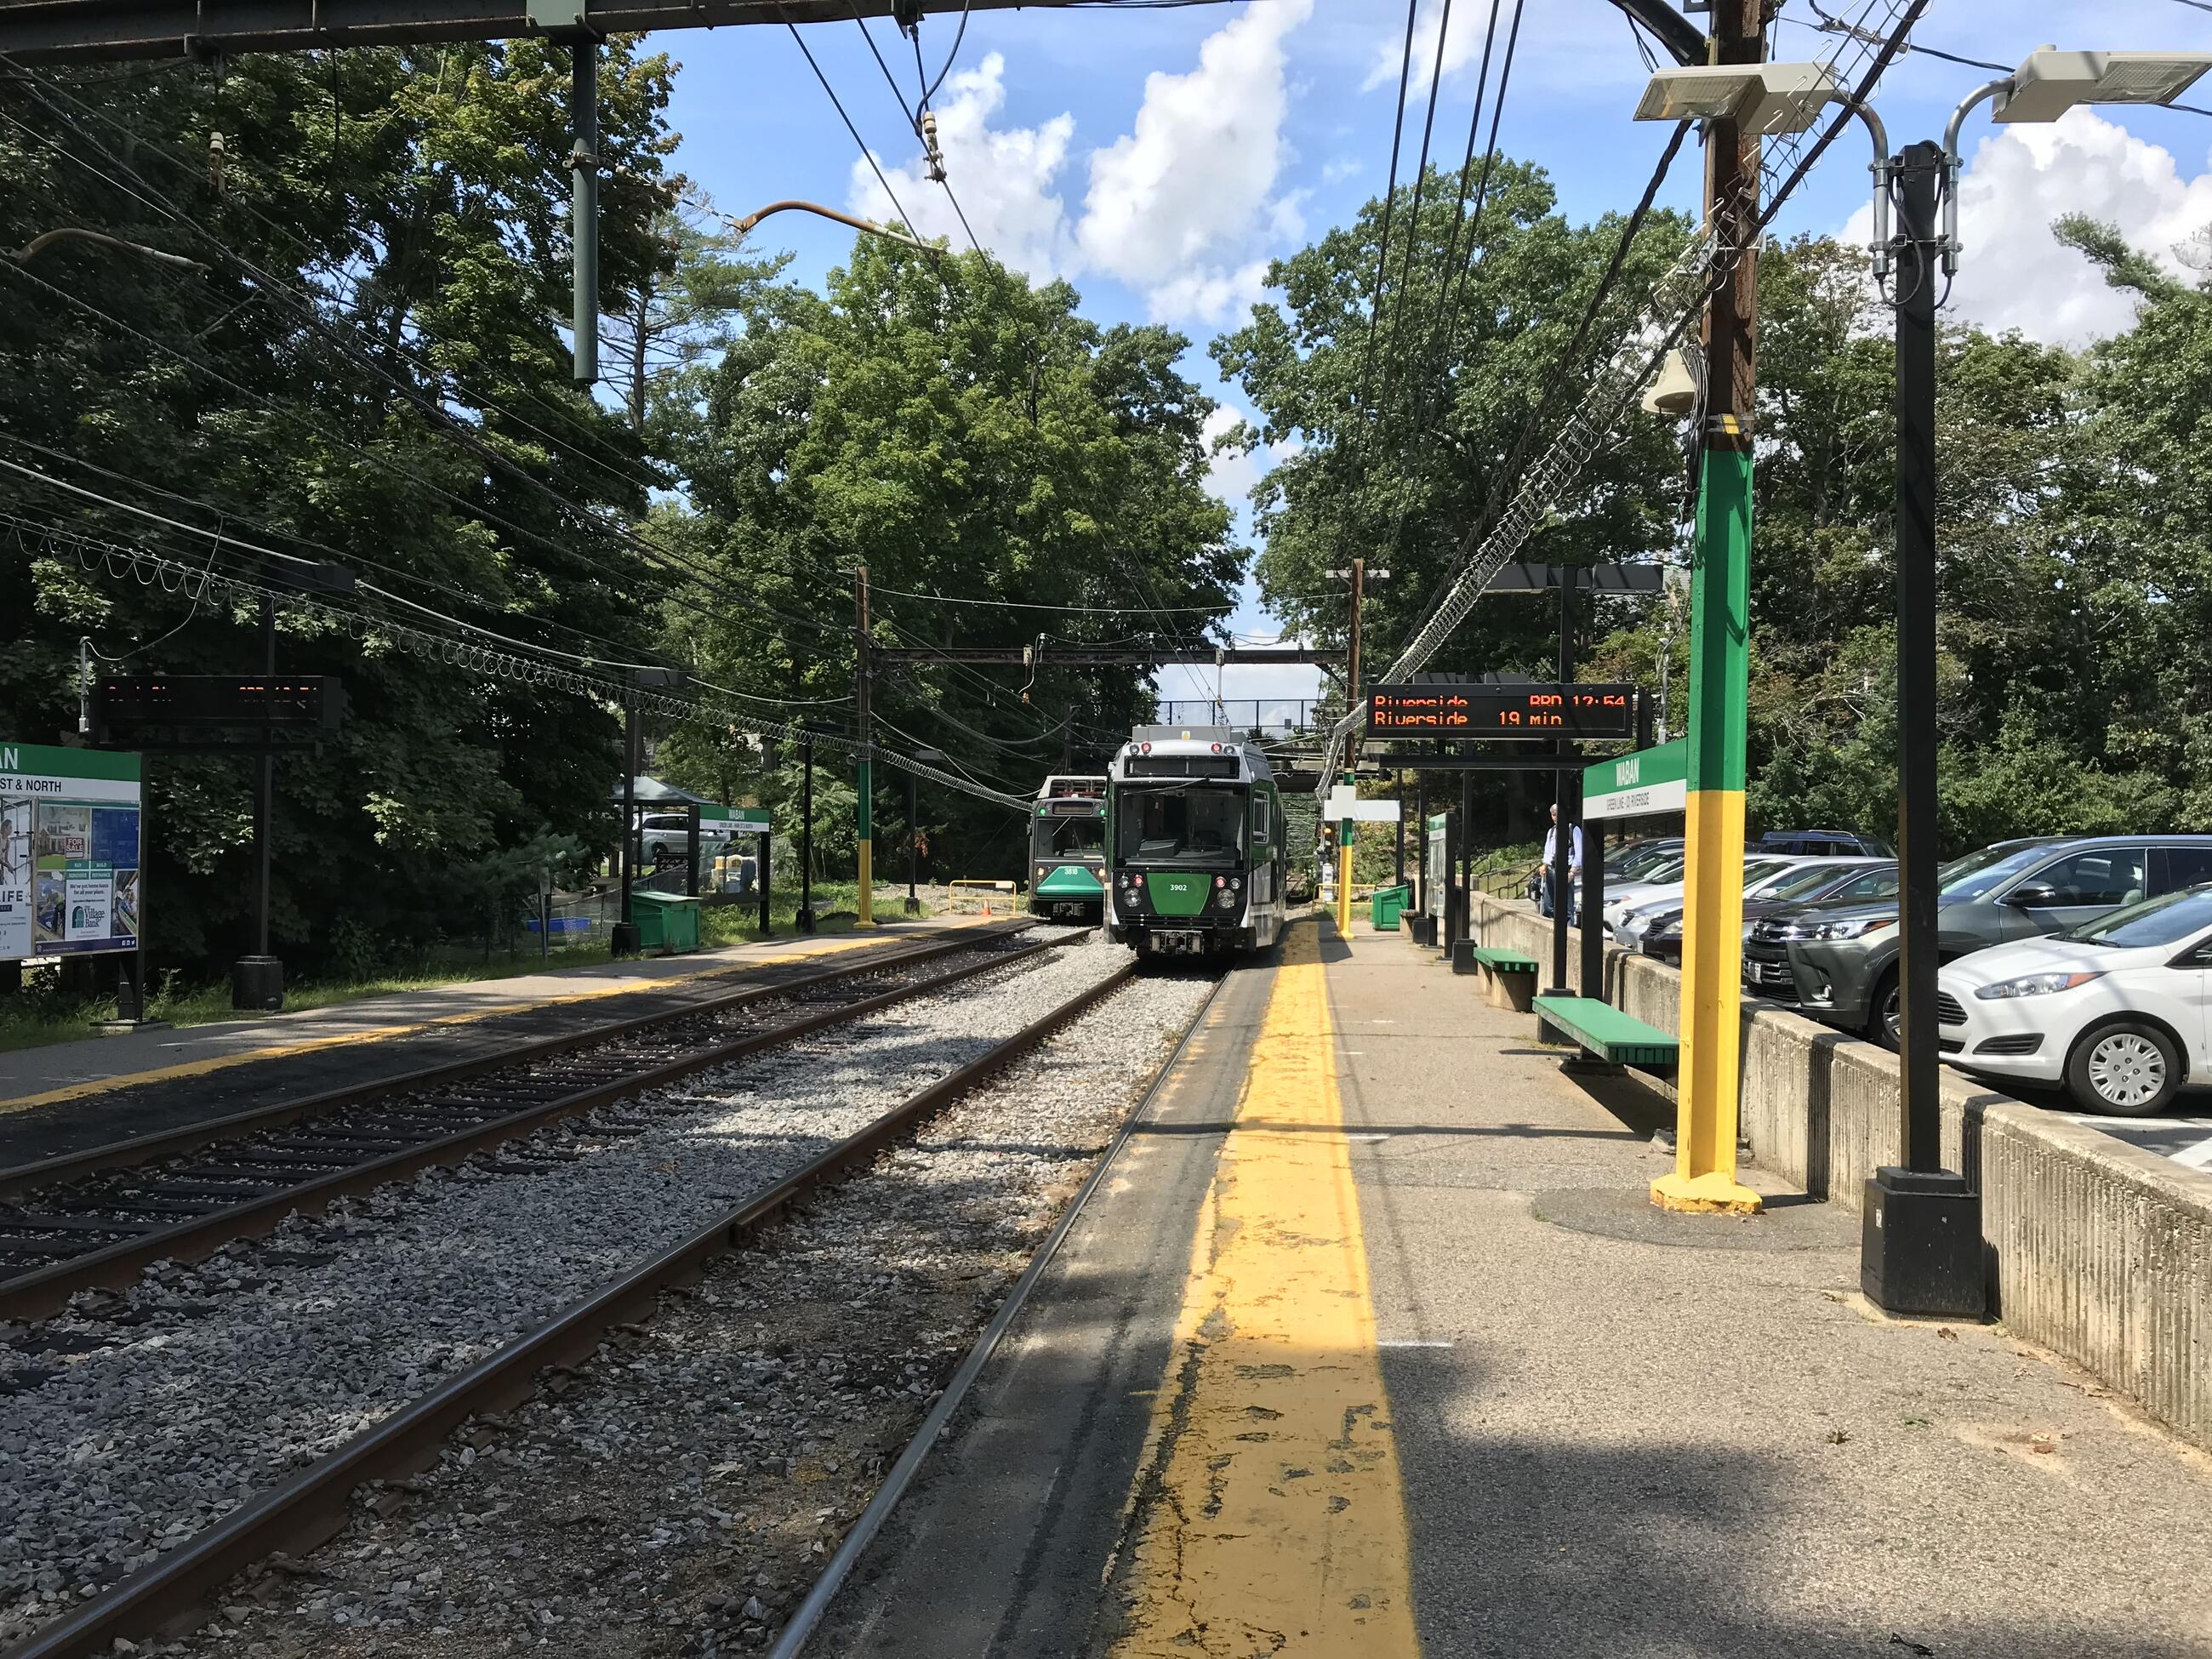 A Green Line train at the Waban station. The entire platform and tracks are visible